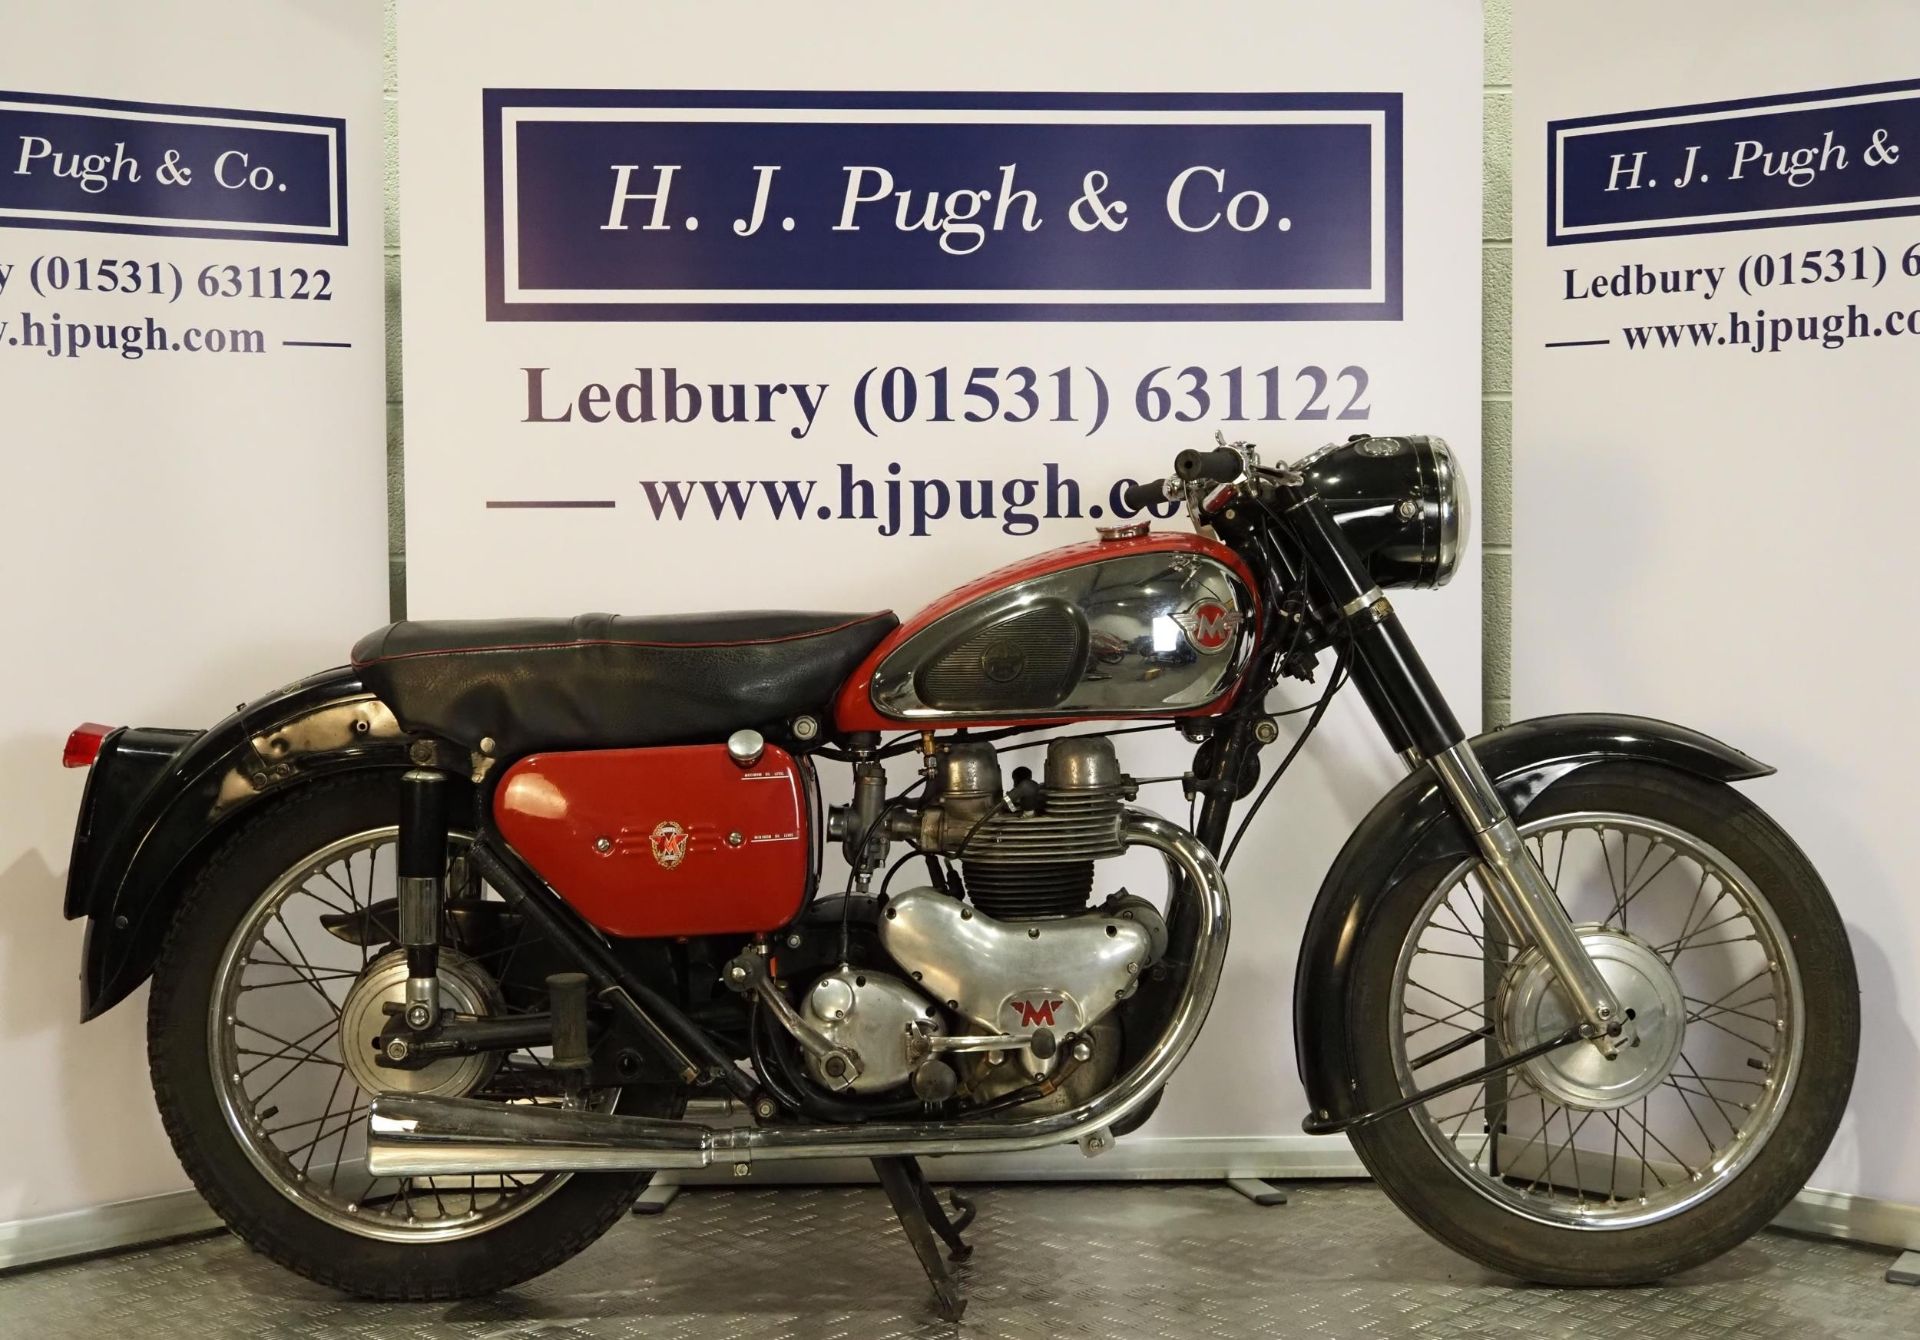 Matchless G11 motorcycle. 1958. 600cc. Frame No. A65717 Engine No. 573005071 Runs and rides.